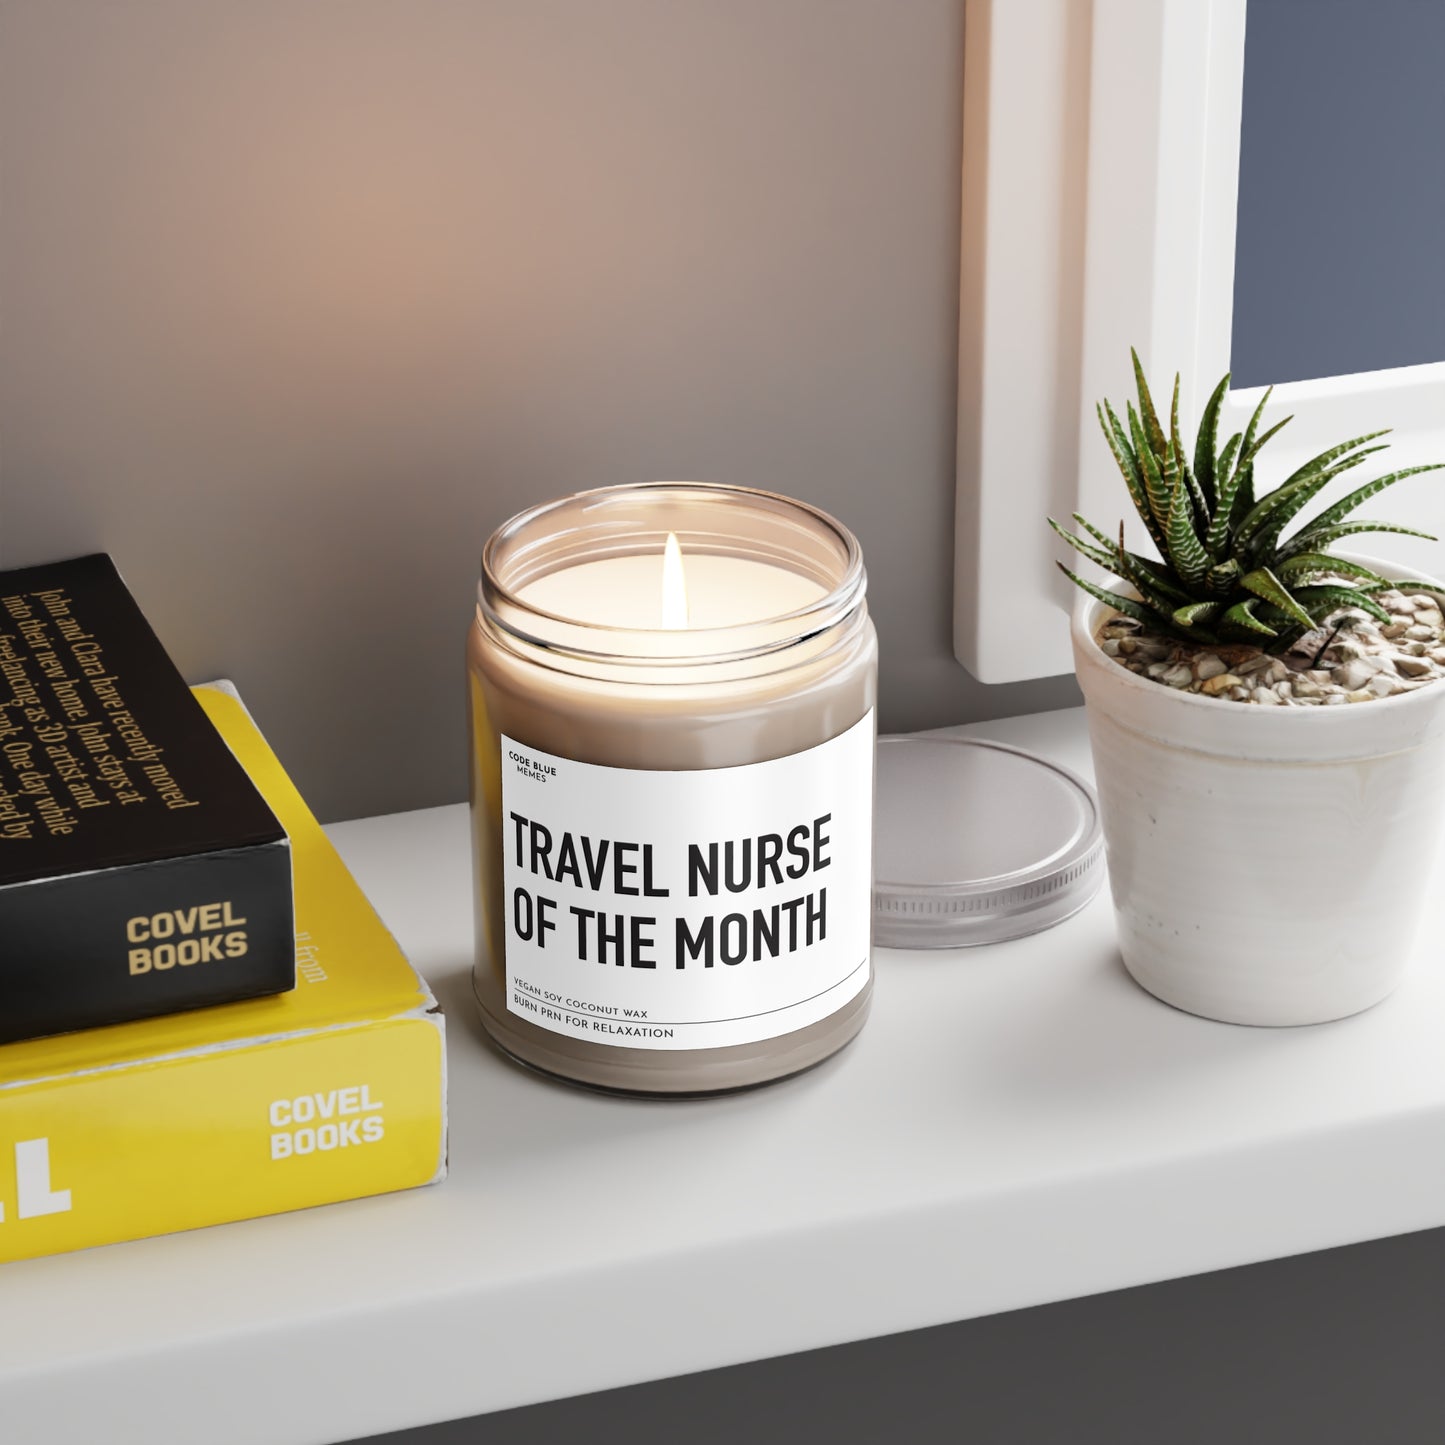 Travel Nurse Of The Month - Scented Candle